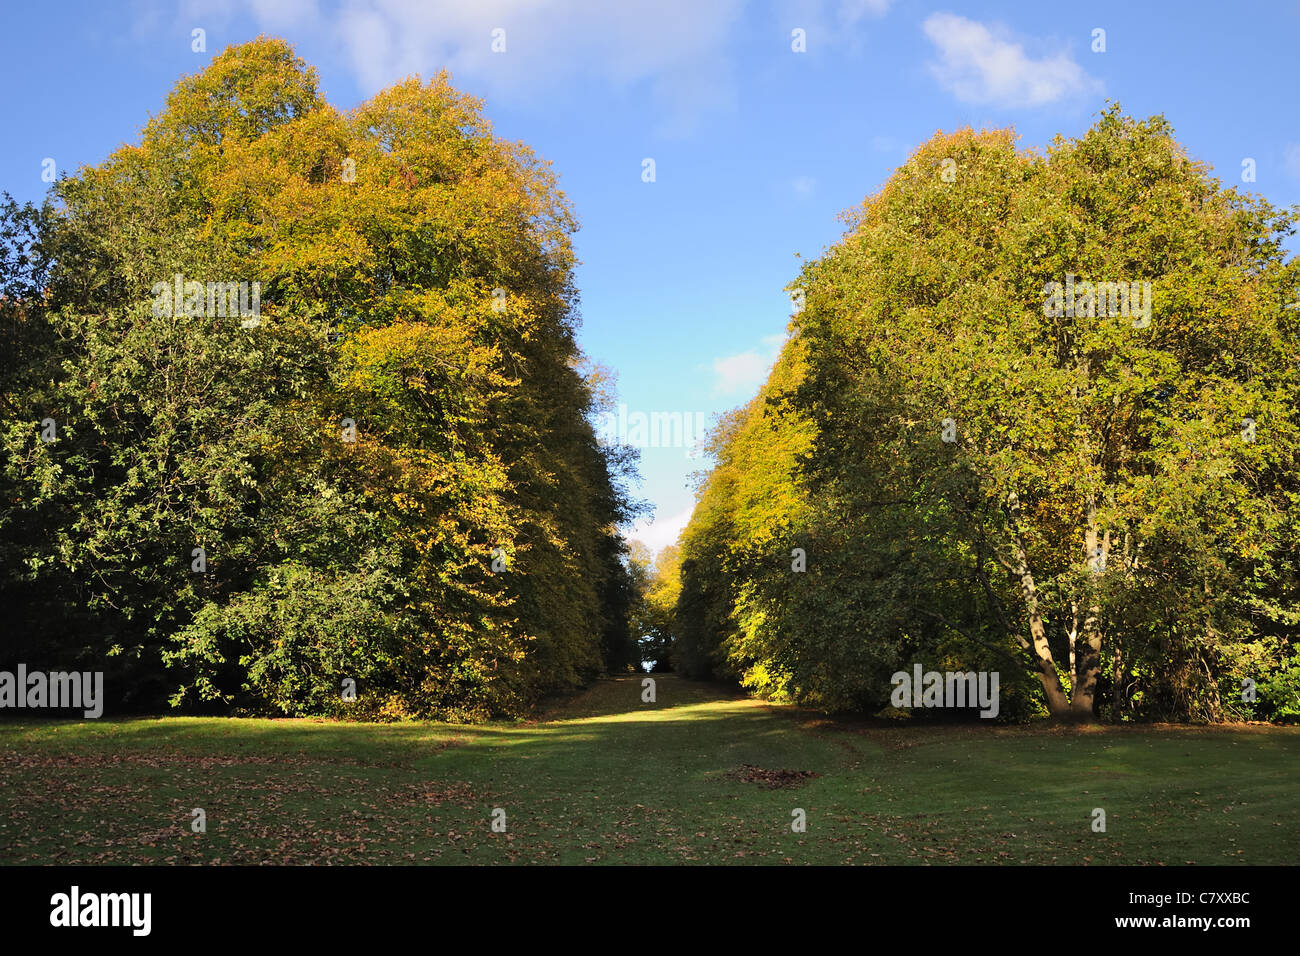 Mature trees with grass pathway or firebreak leading to the top of the hill in Pollok park Glasgow, Scotland, UK Stock Photo